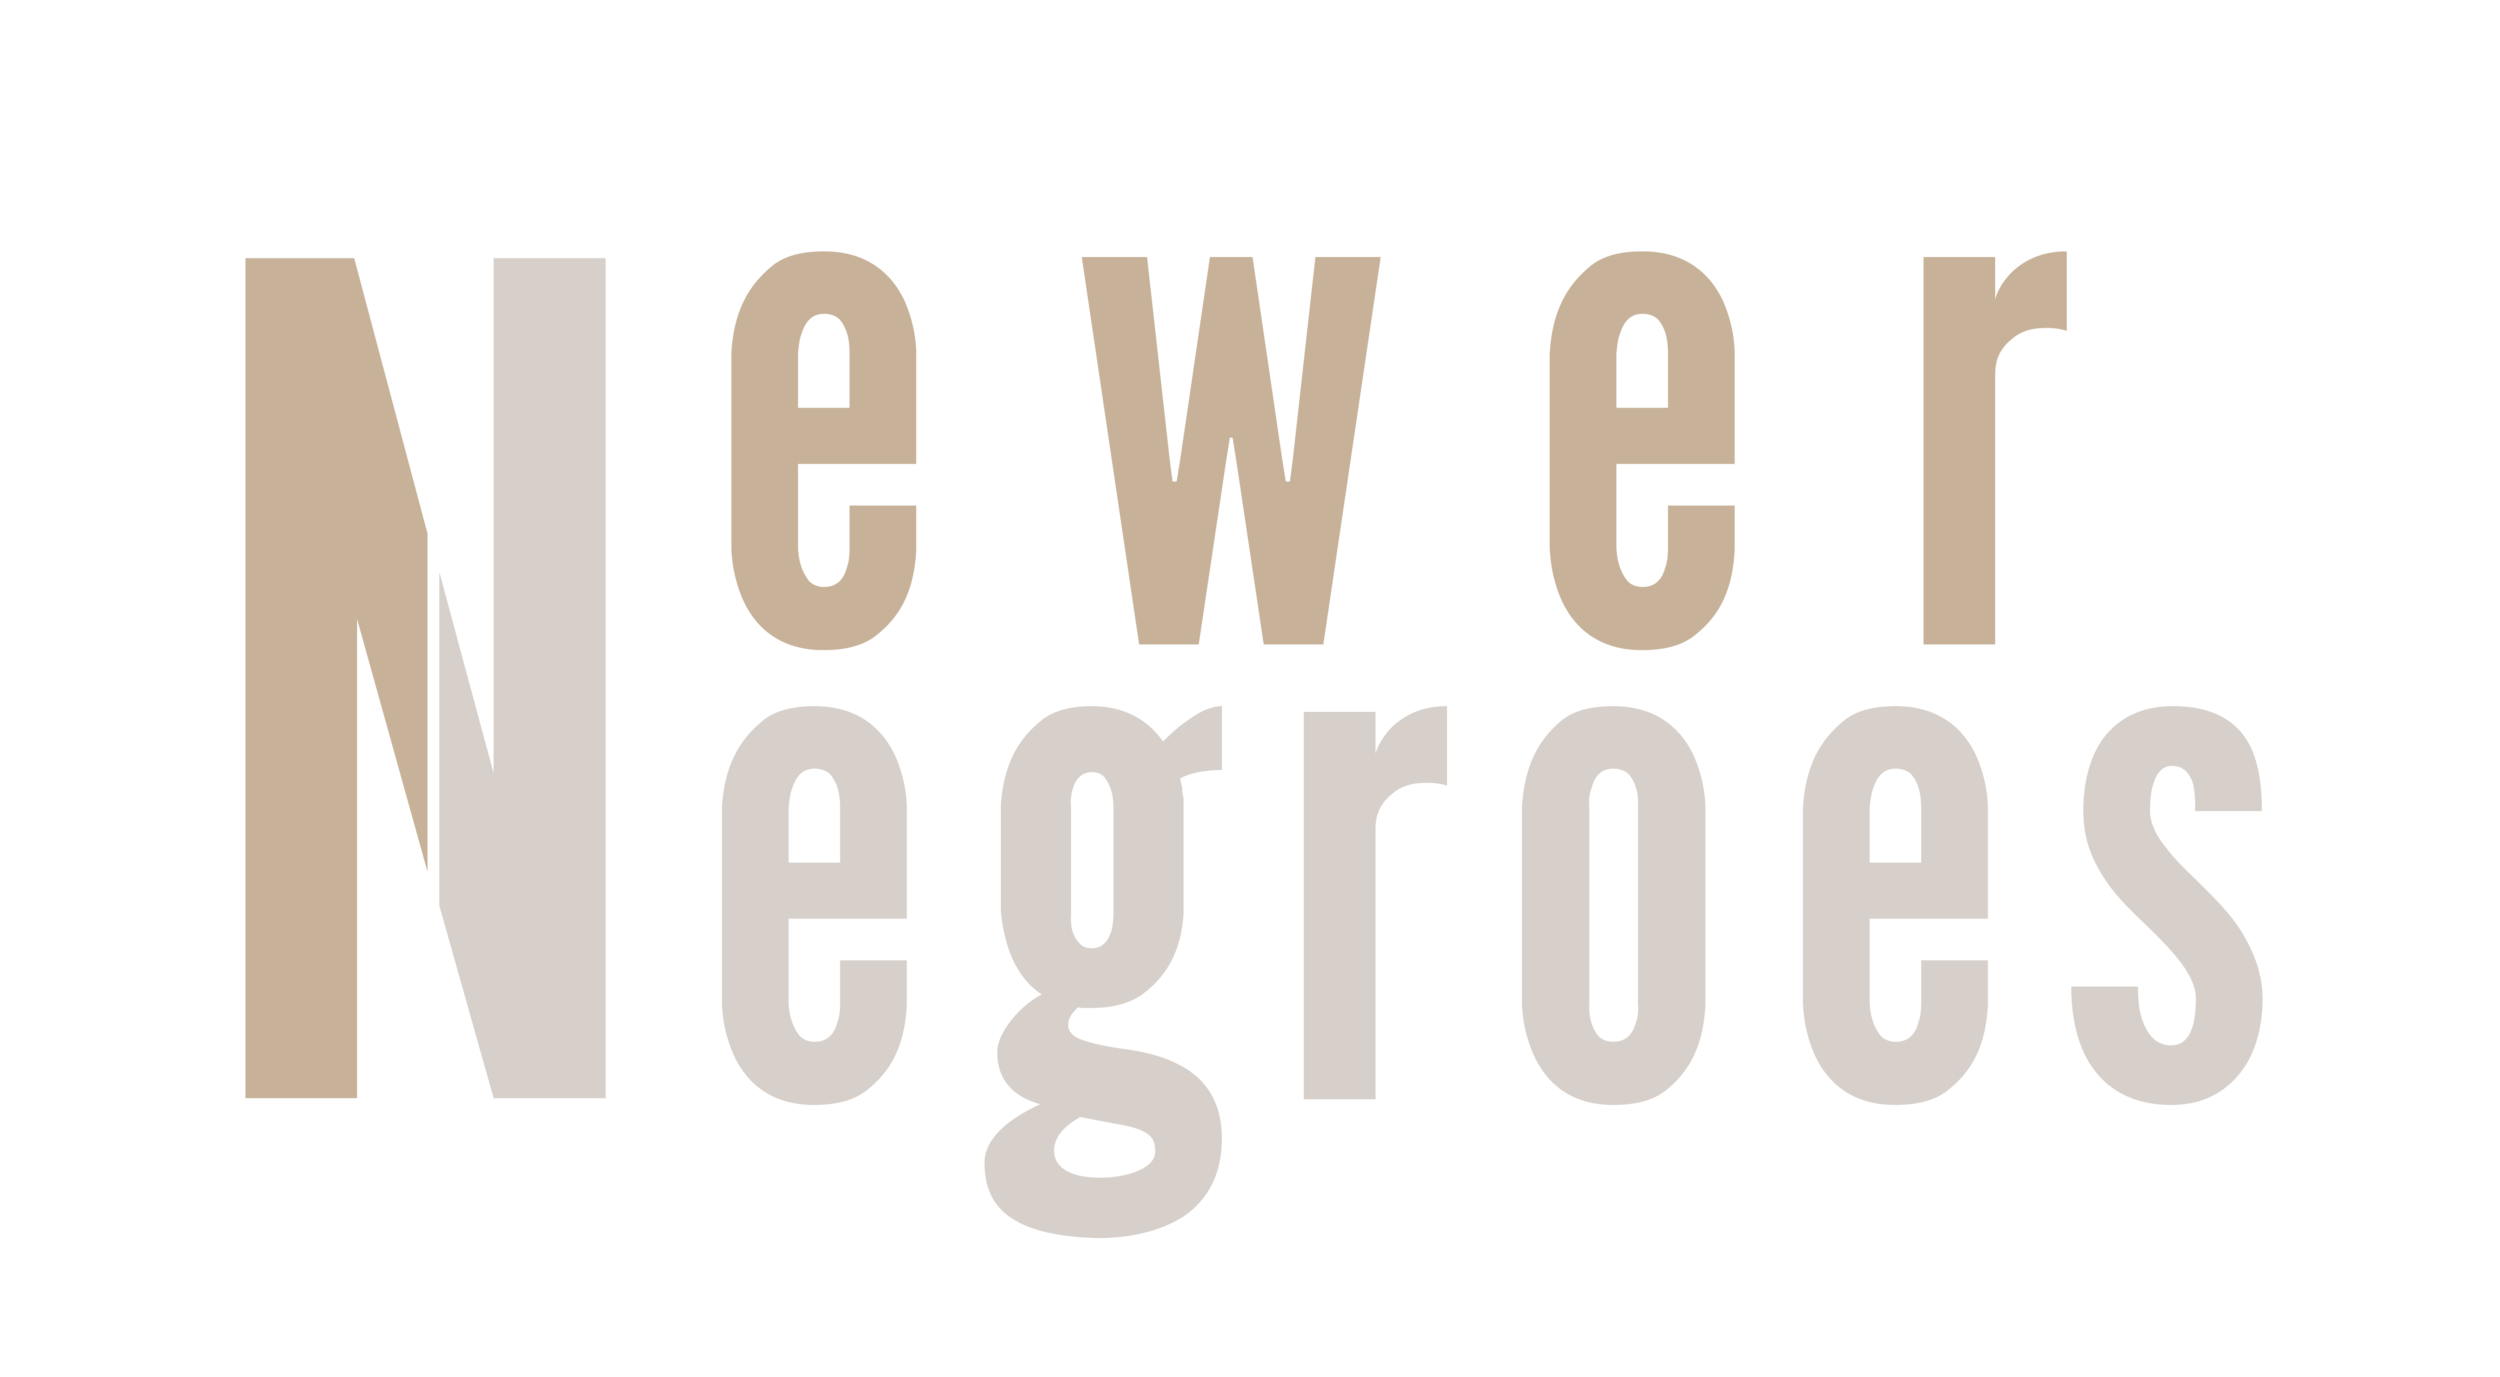 Newer Negroes